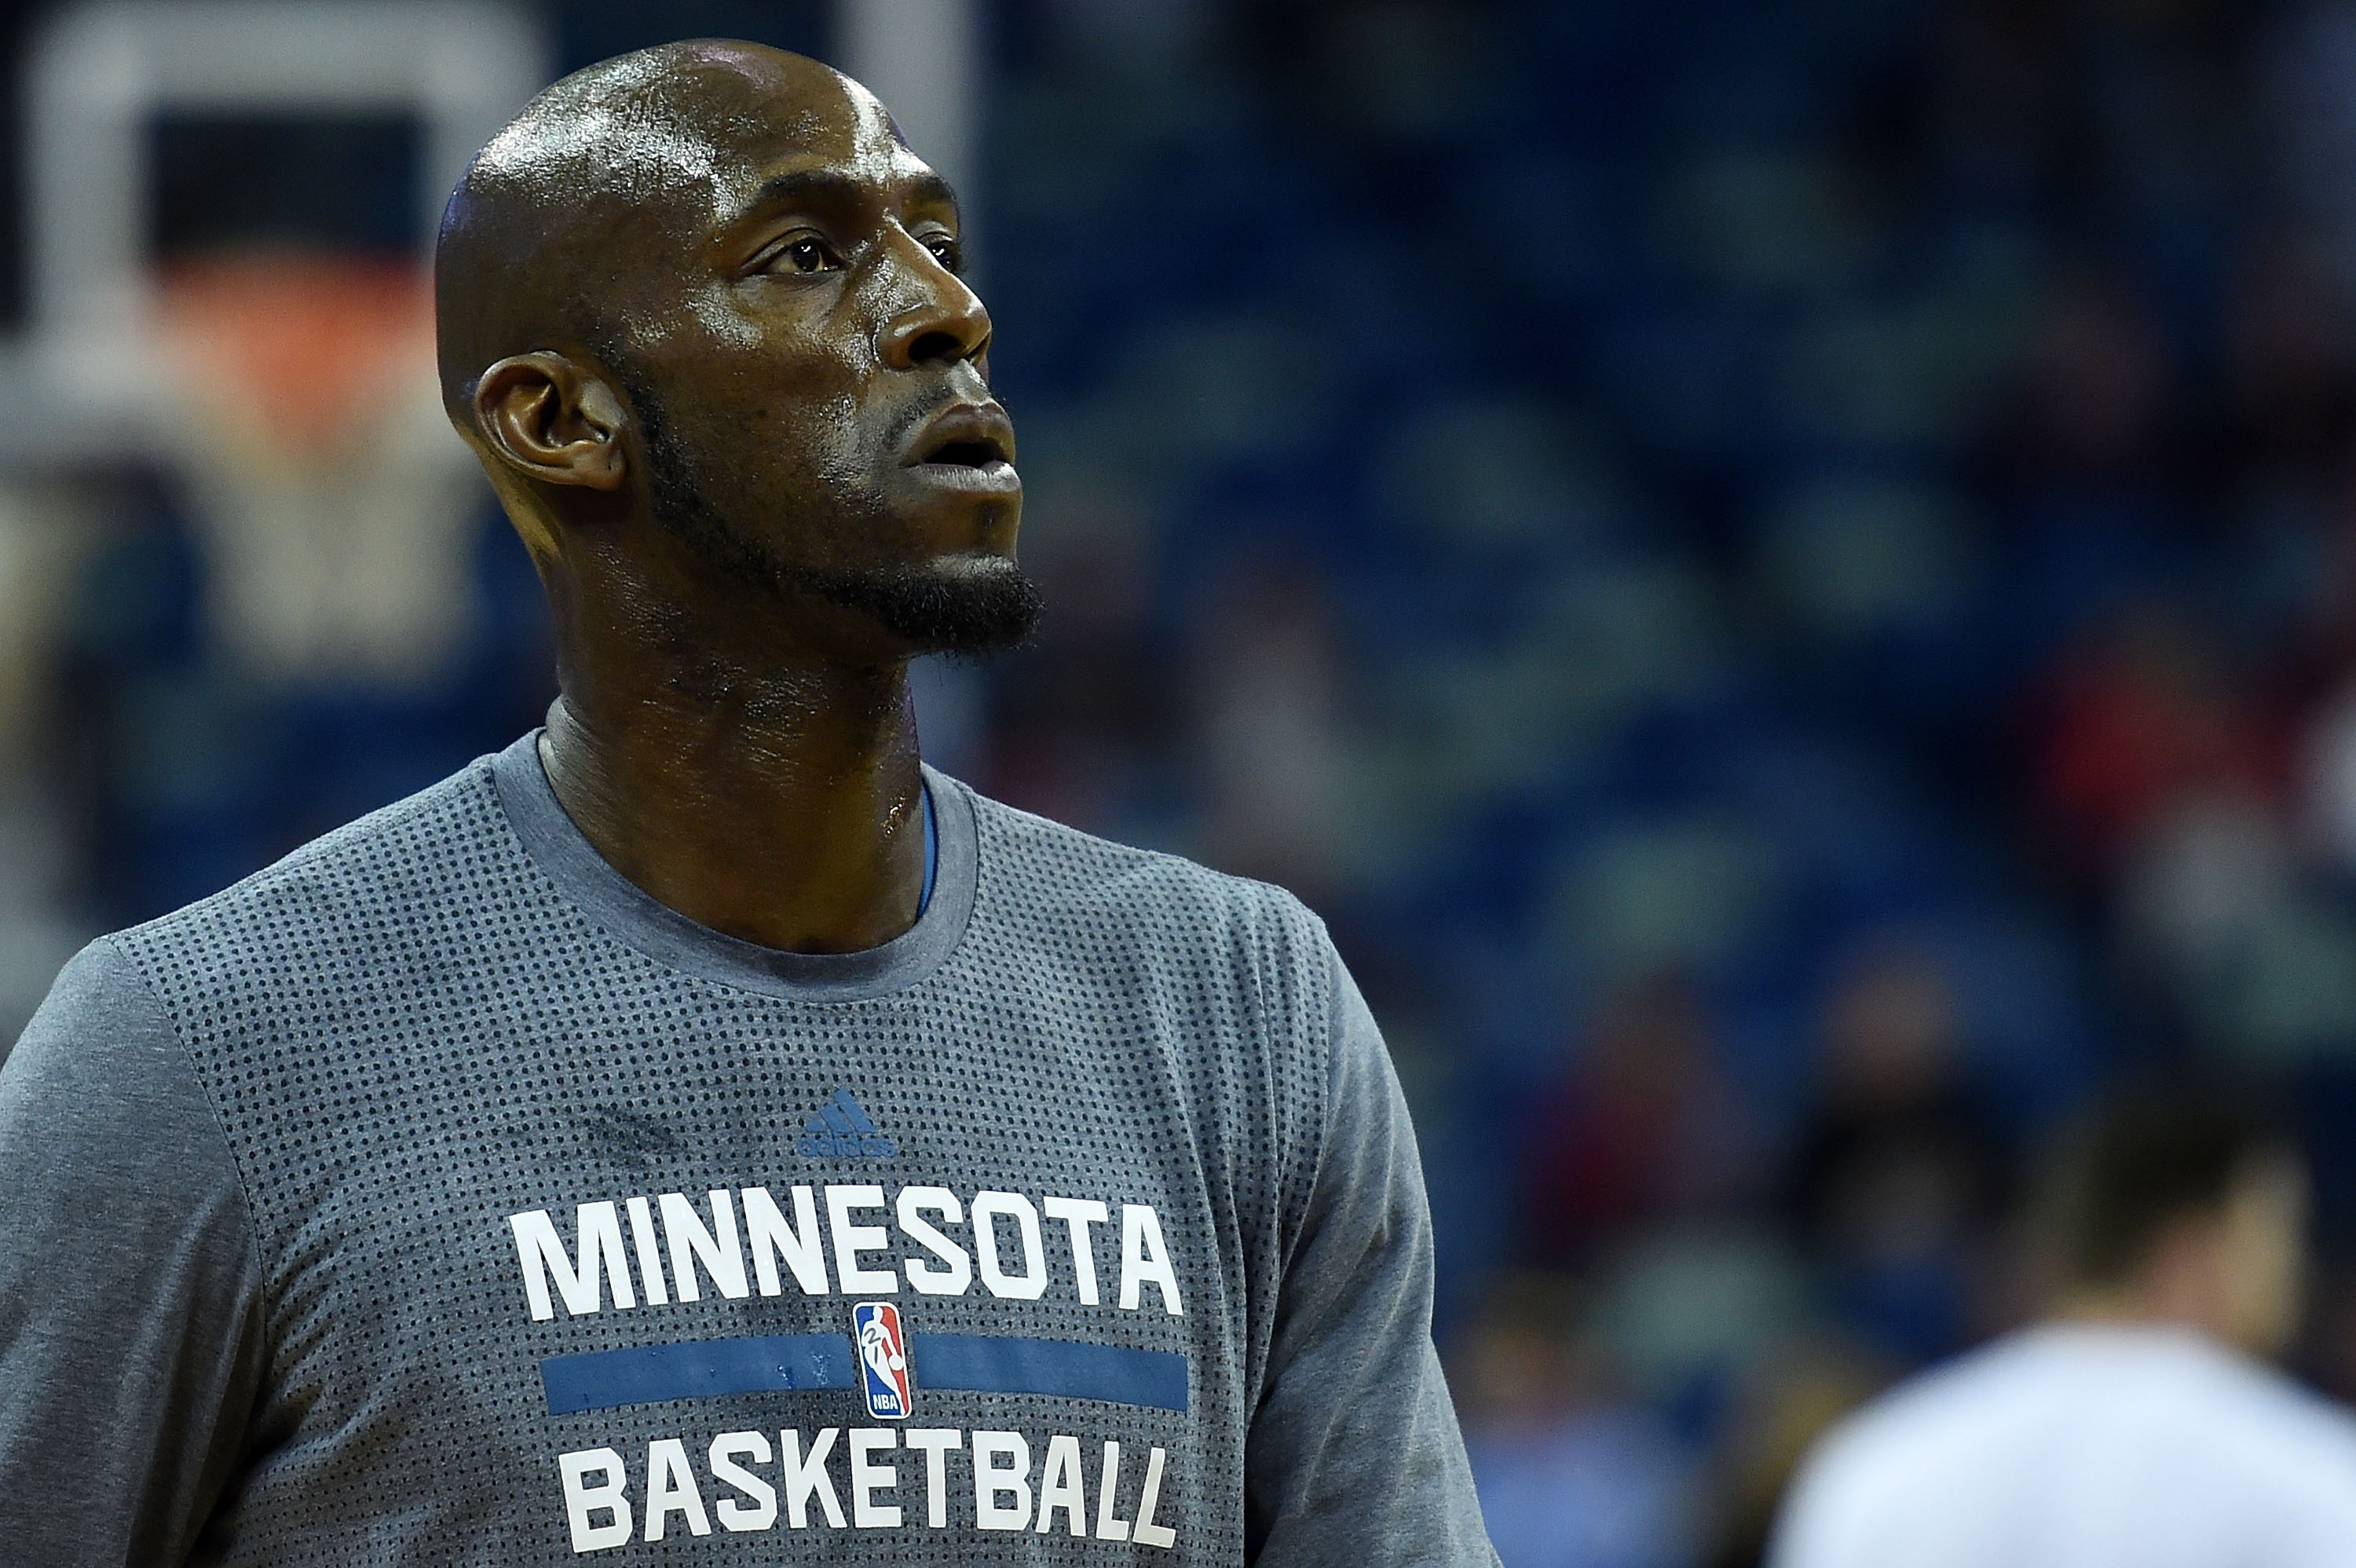 Kevin Garnett will be hoping his potential purchase of the Minnesota Timberwolves goes differently than his first shot at sports ownership.